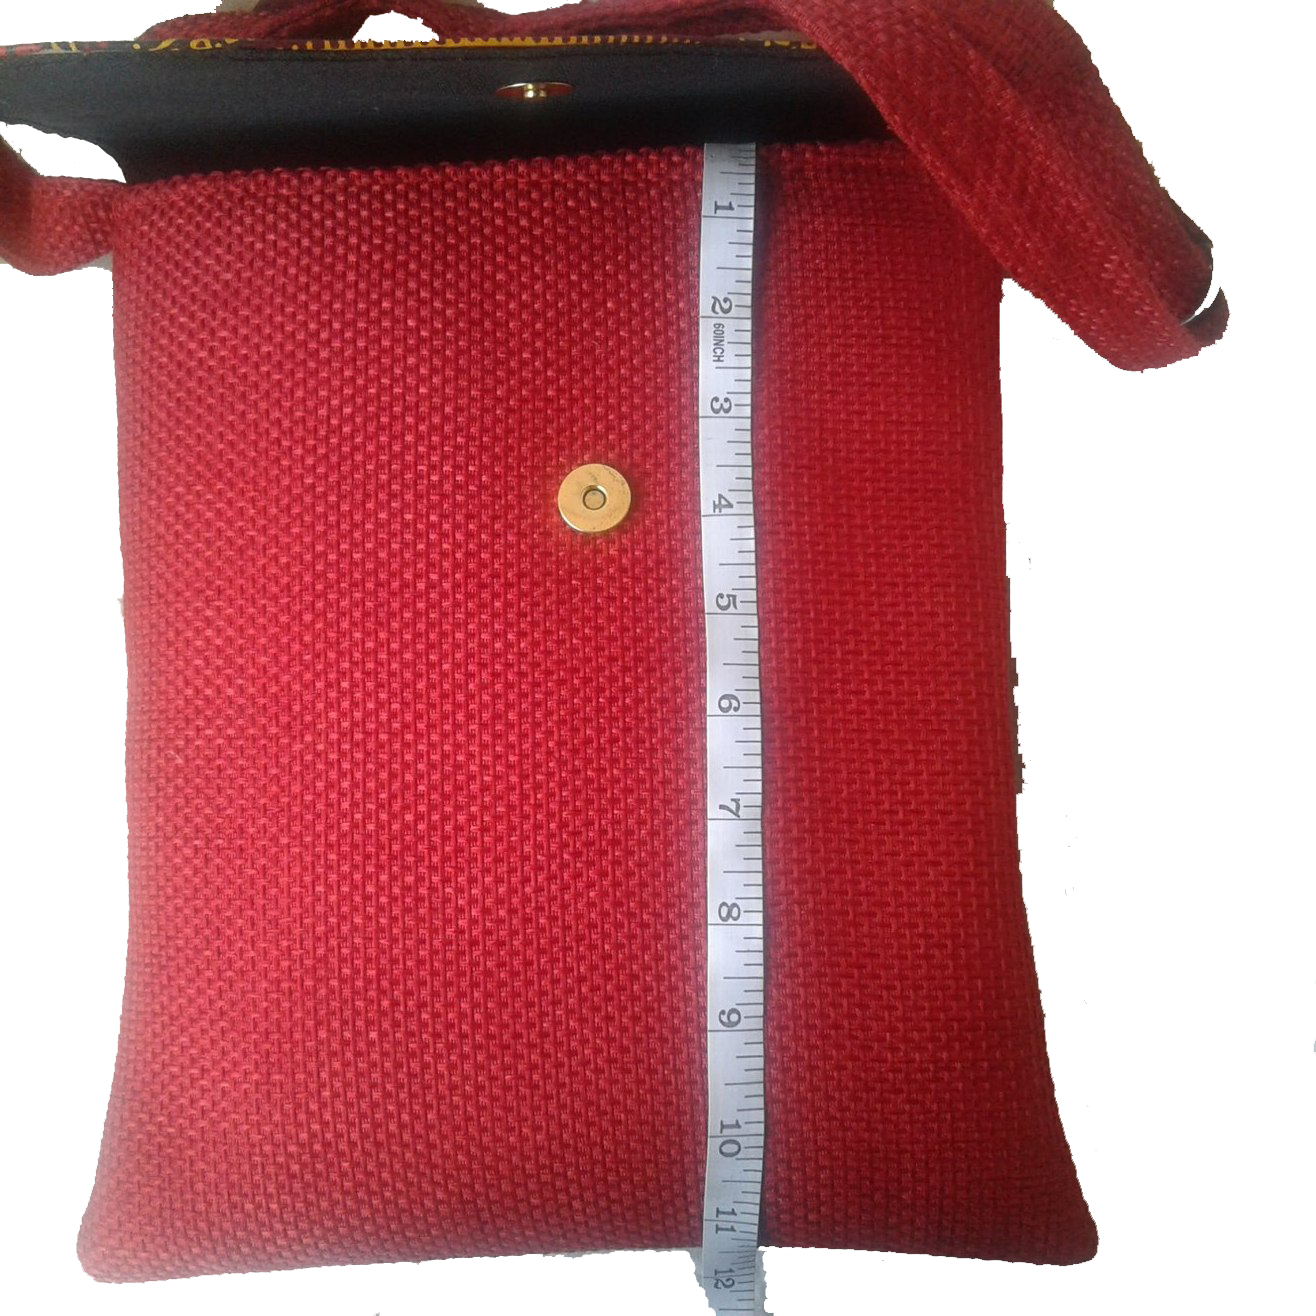 Red crossbody bag with adjustable straps